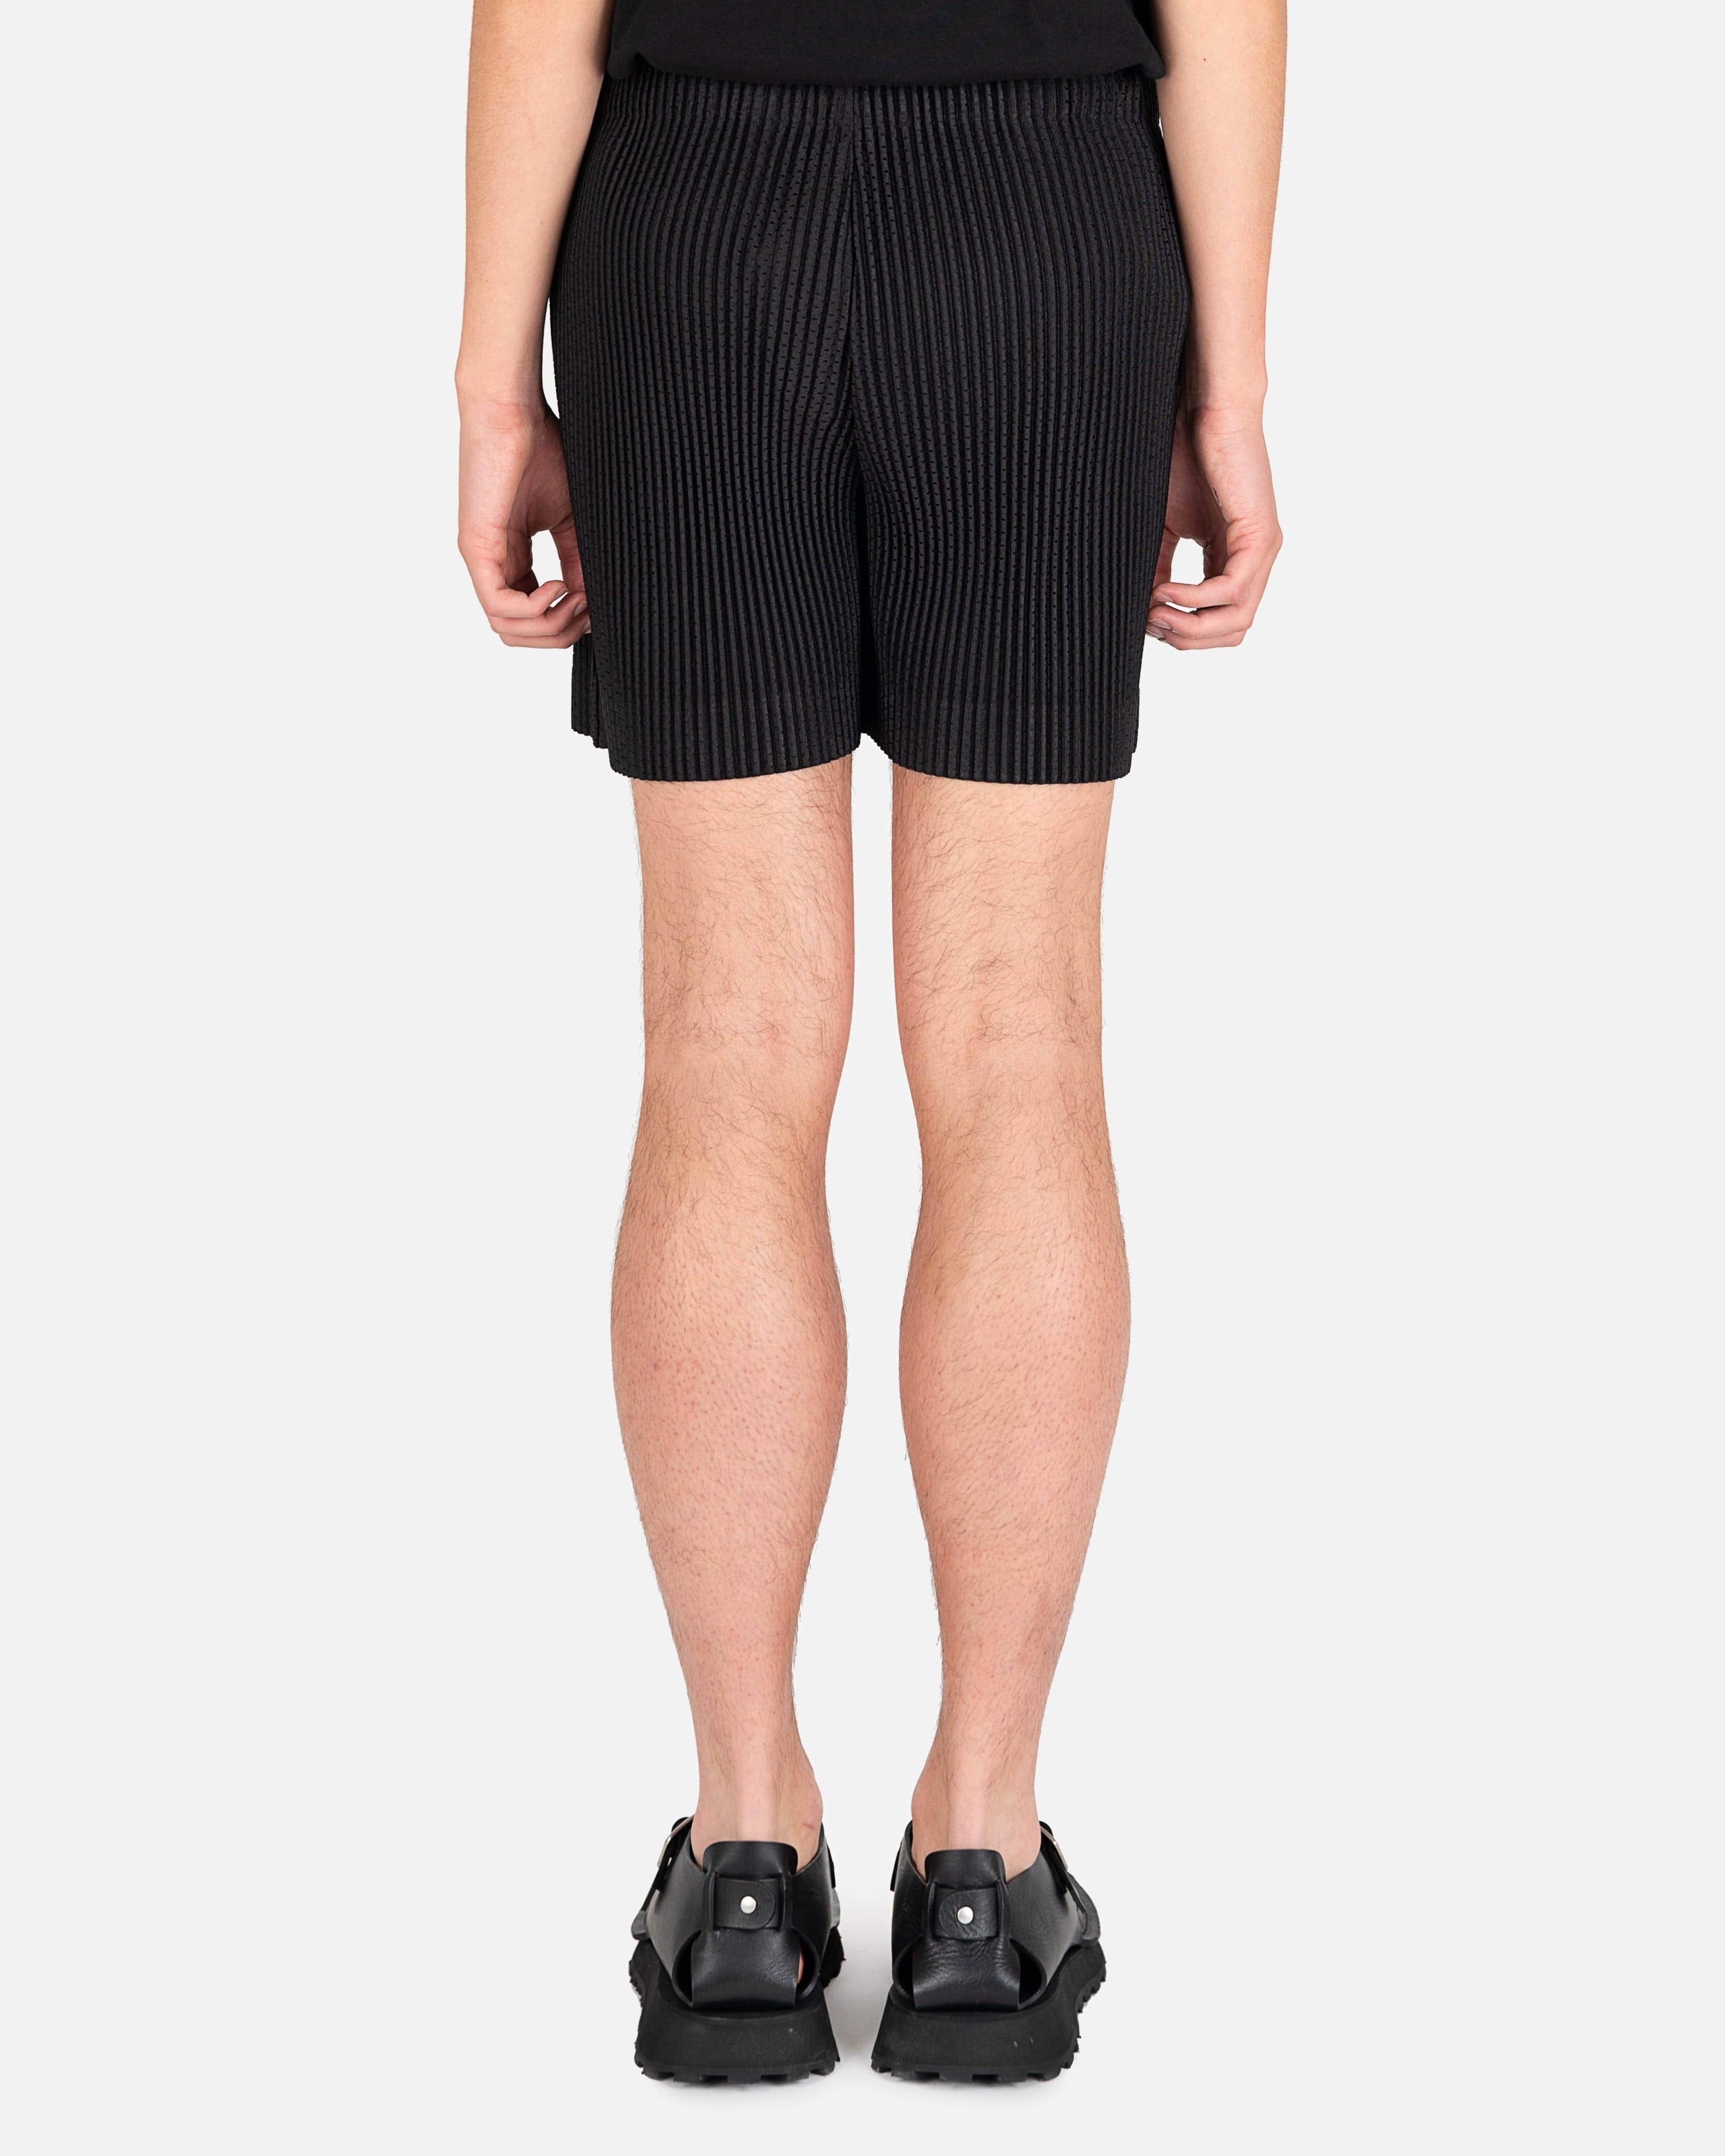 Outer Mesh Shorts in Black